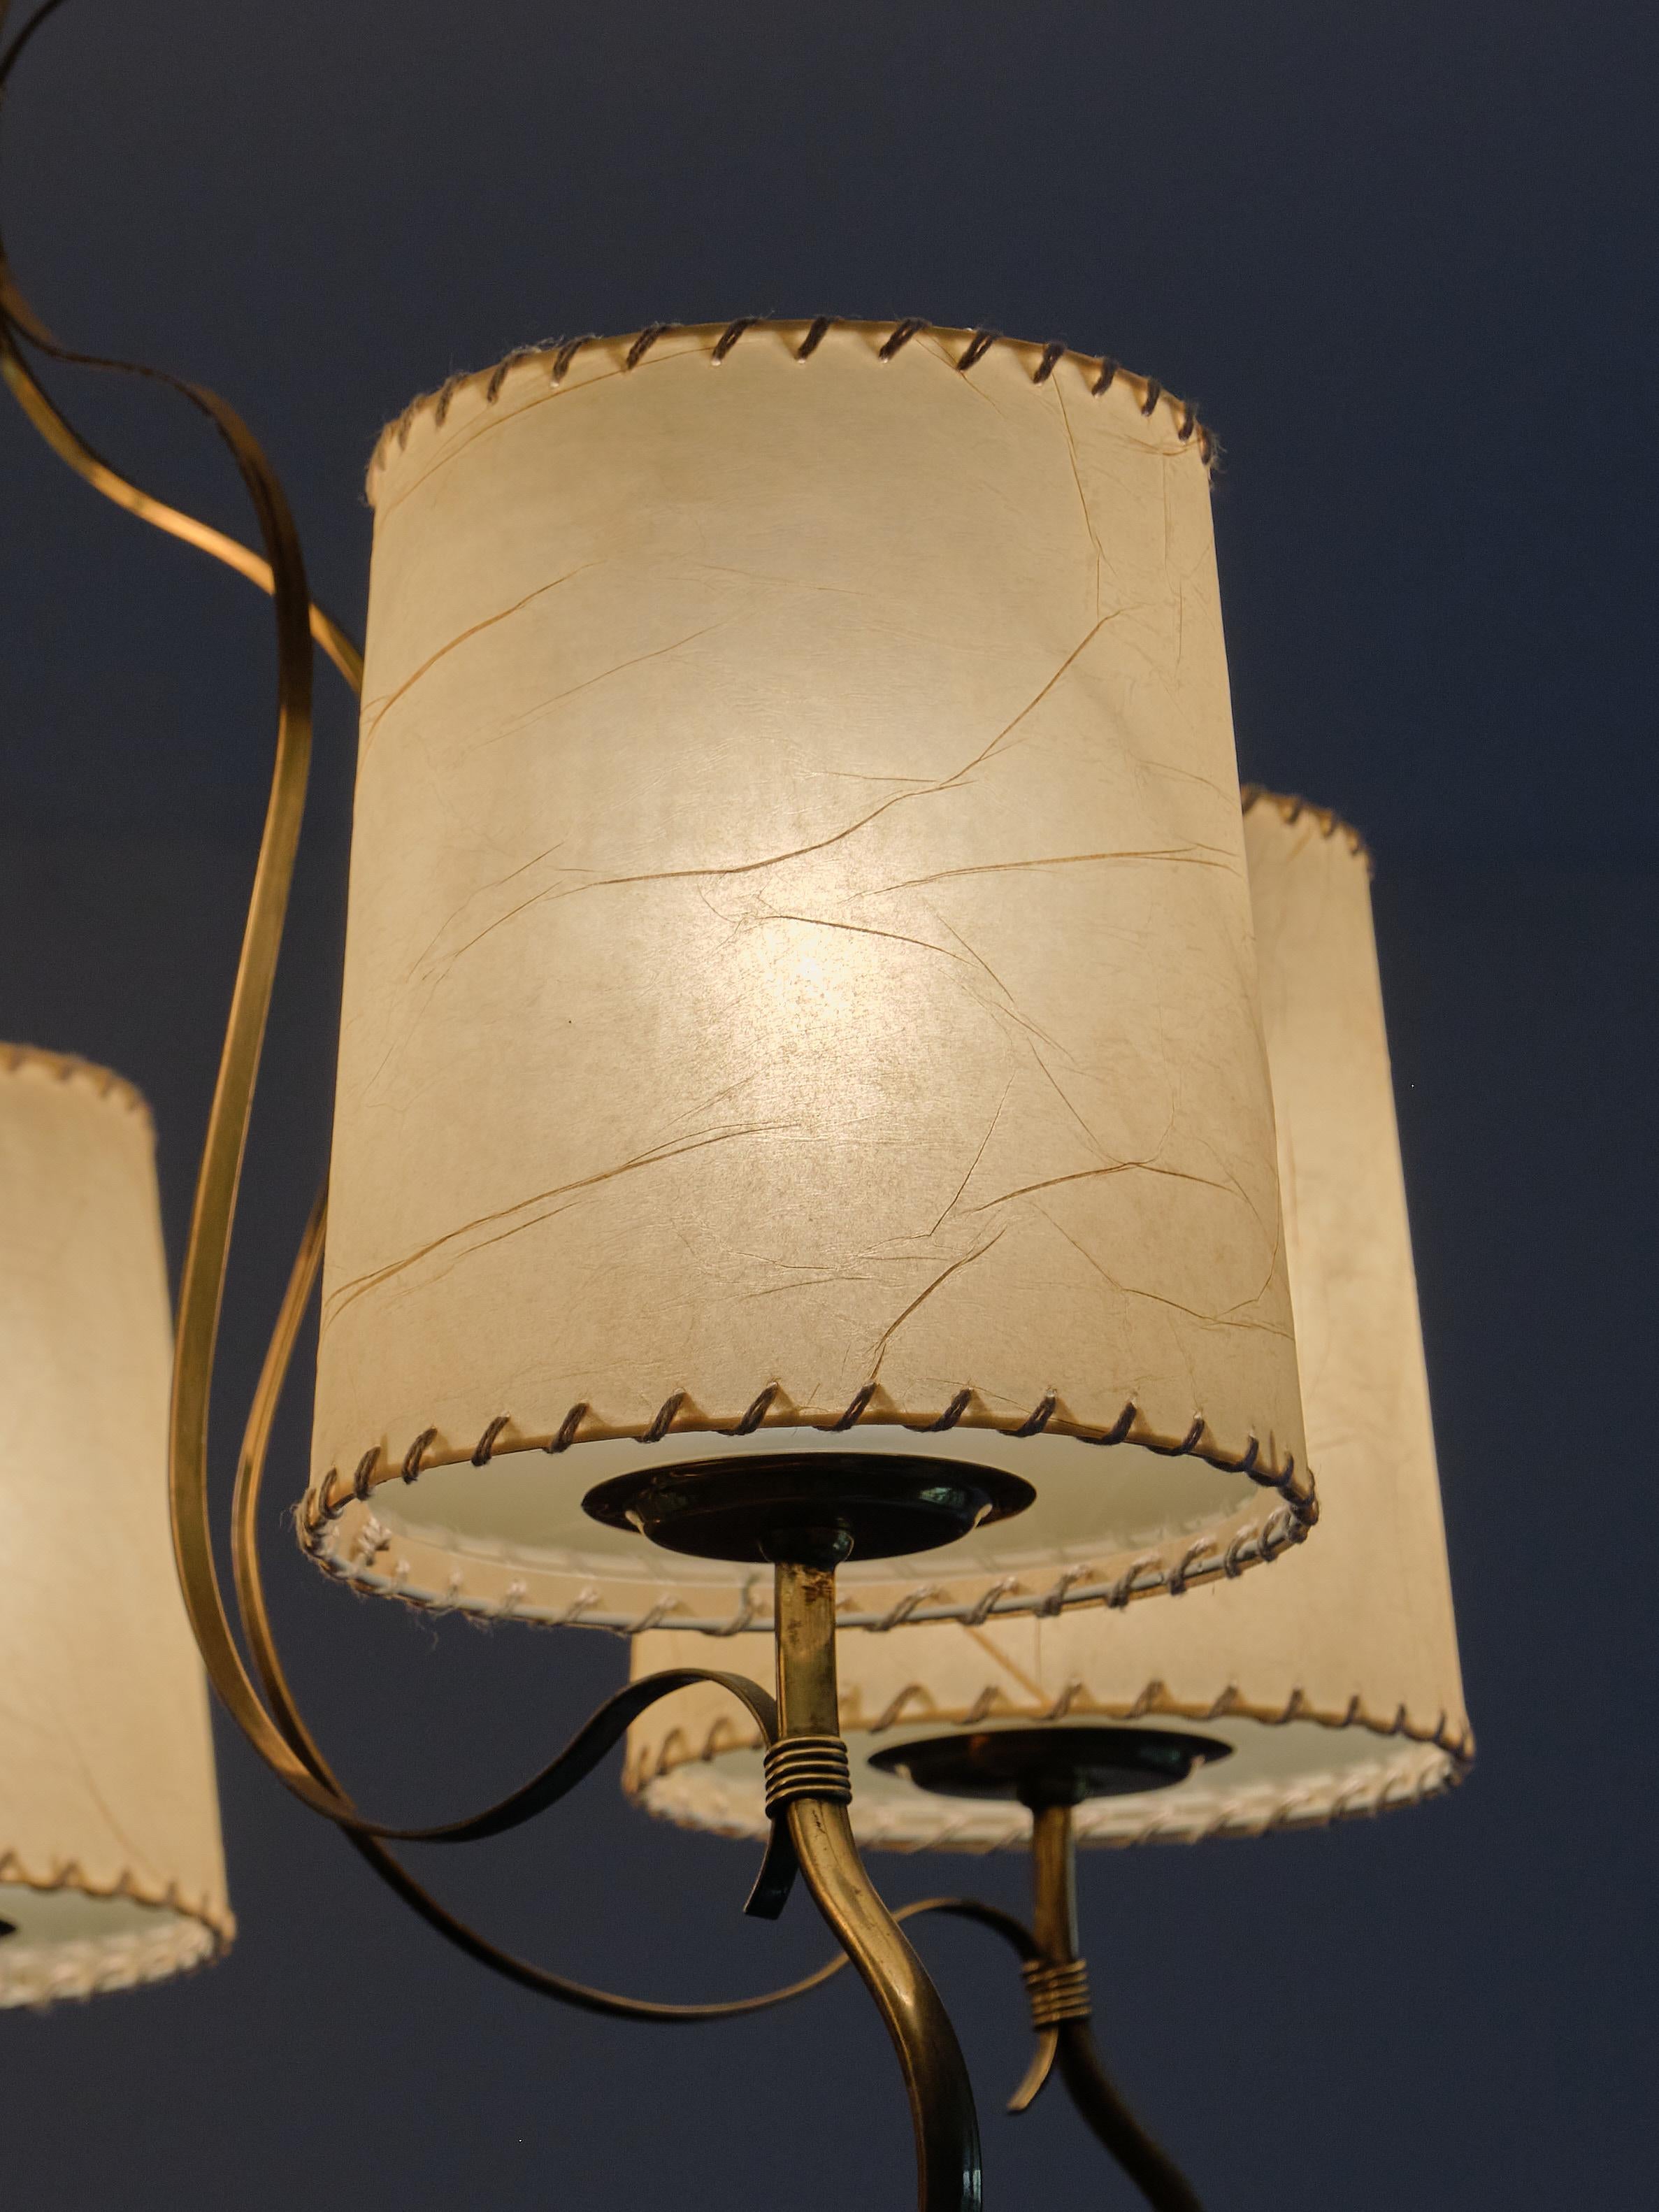 Scandinavian Modern Paavo Tynell Chandelier in Brass and Parchment, Model 9001, Taito Finland, 1940s For Sale